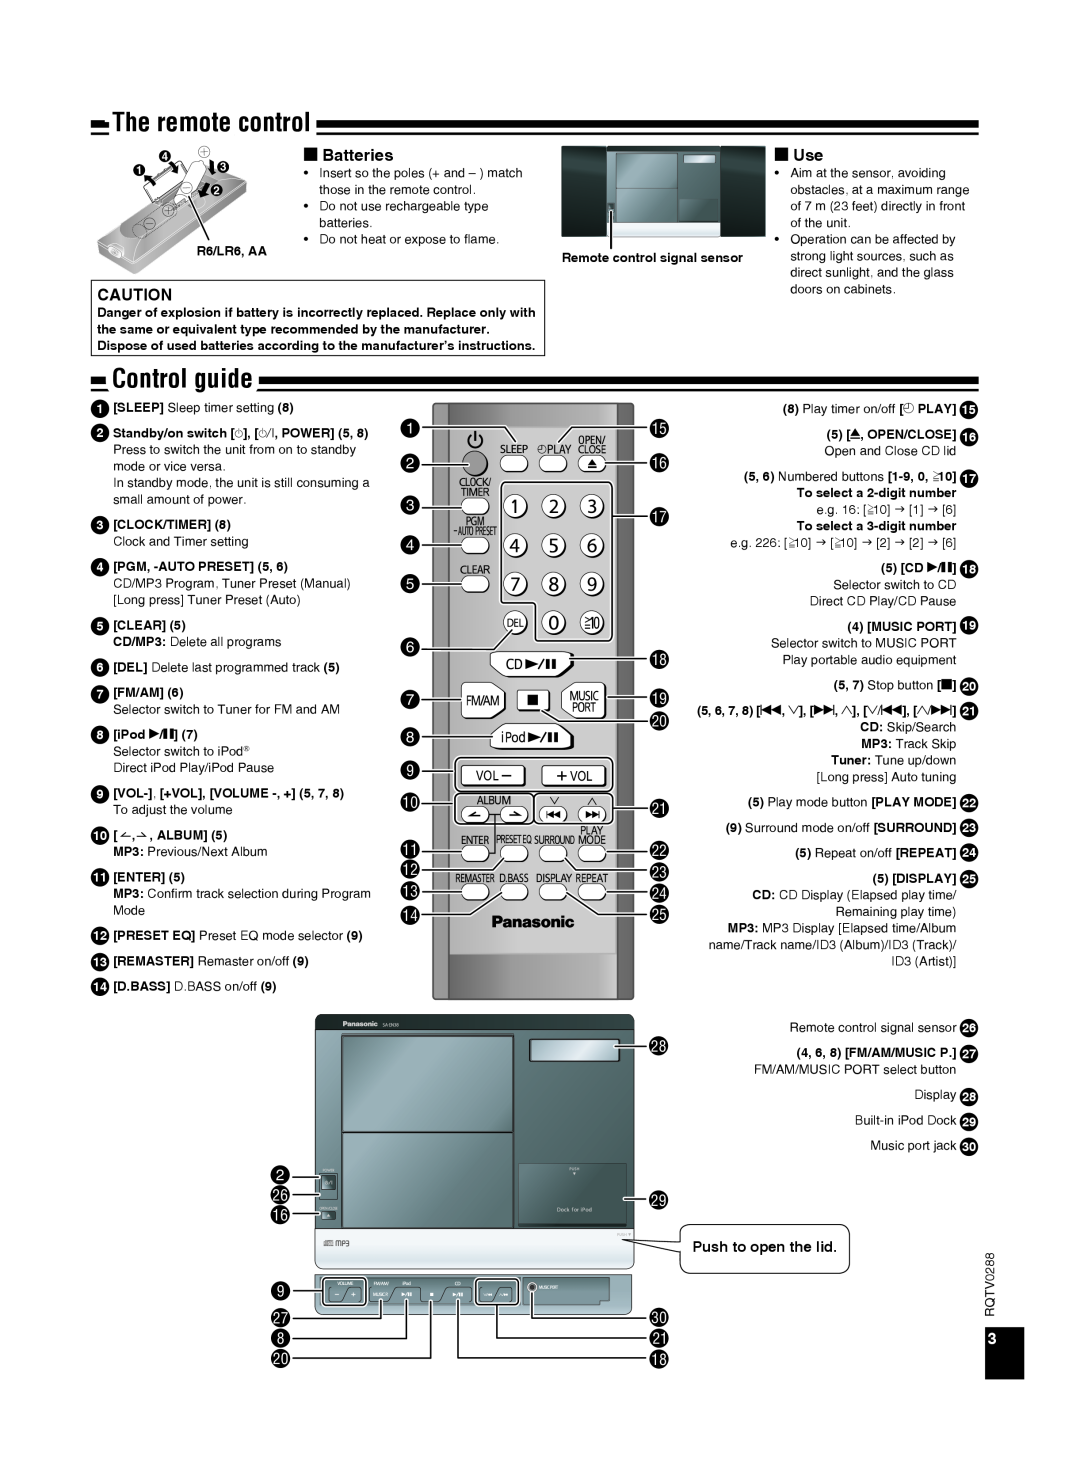 Panasonic SCEN38 important safety instructions Control guide, g Batteries, g Use 